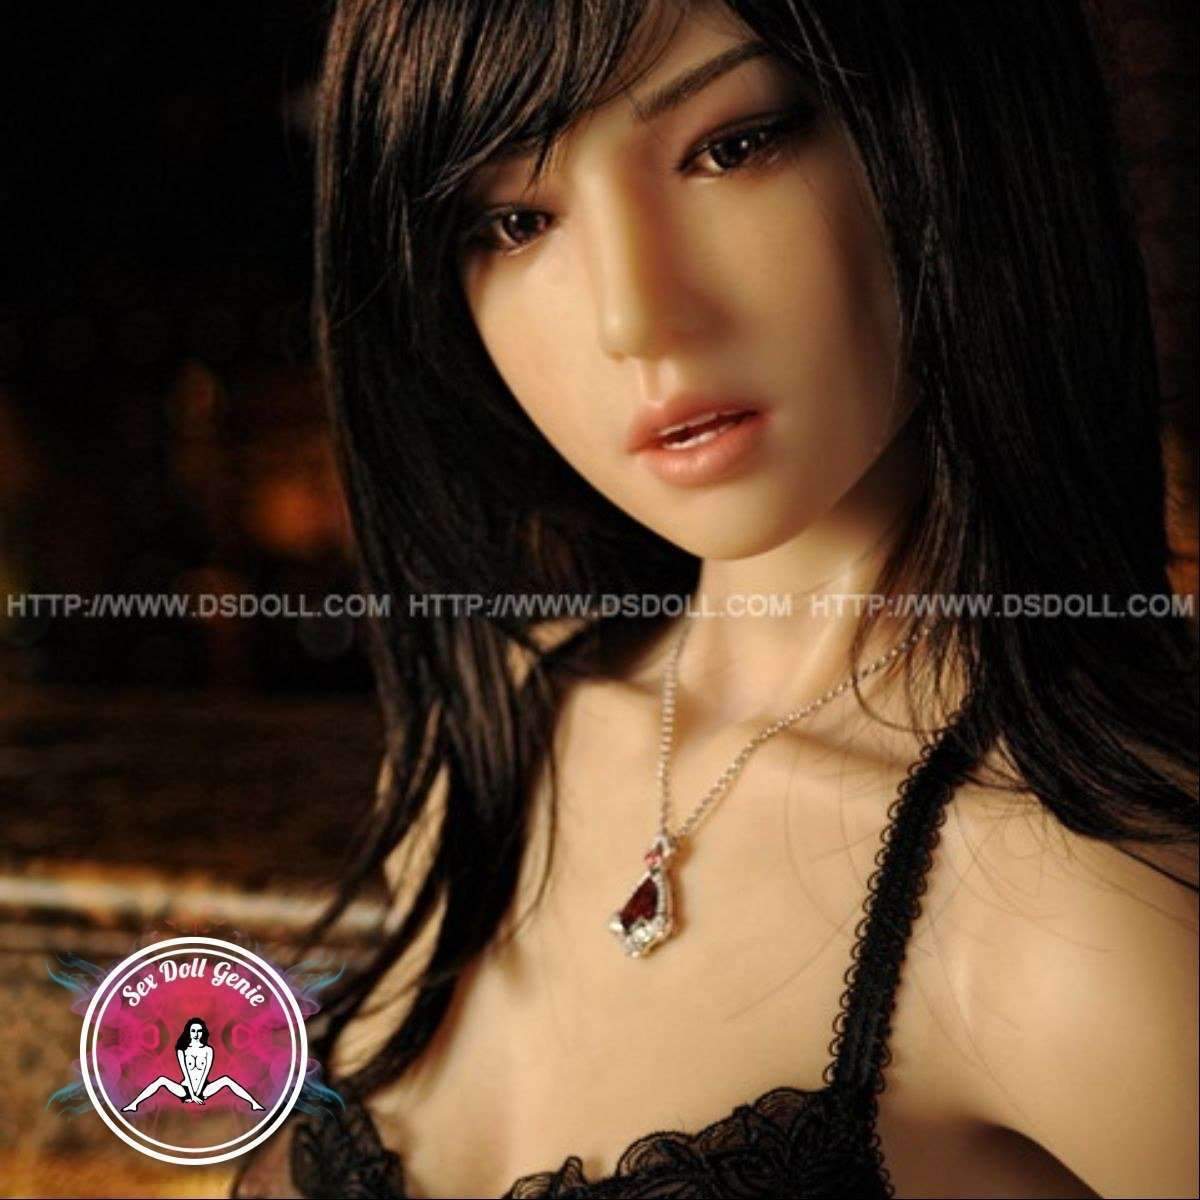 DS Doll - 160cm - Kayla Head - Type 1 D Cup Silicone Doll-21